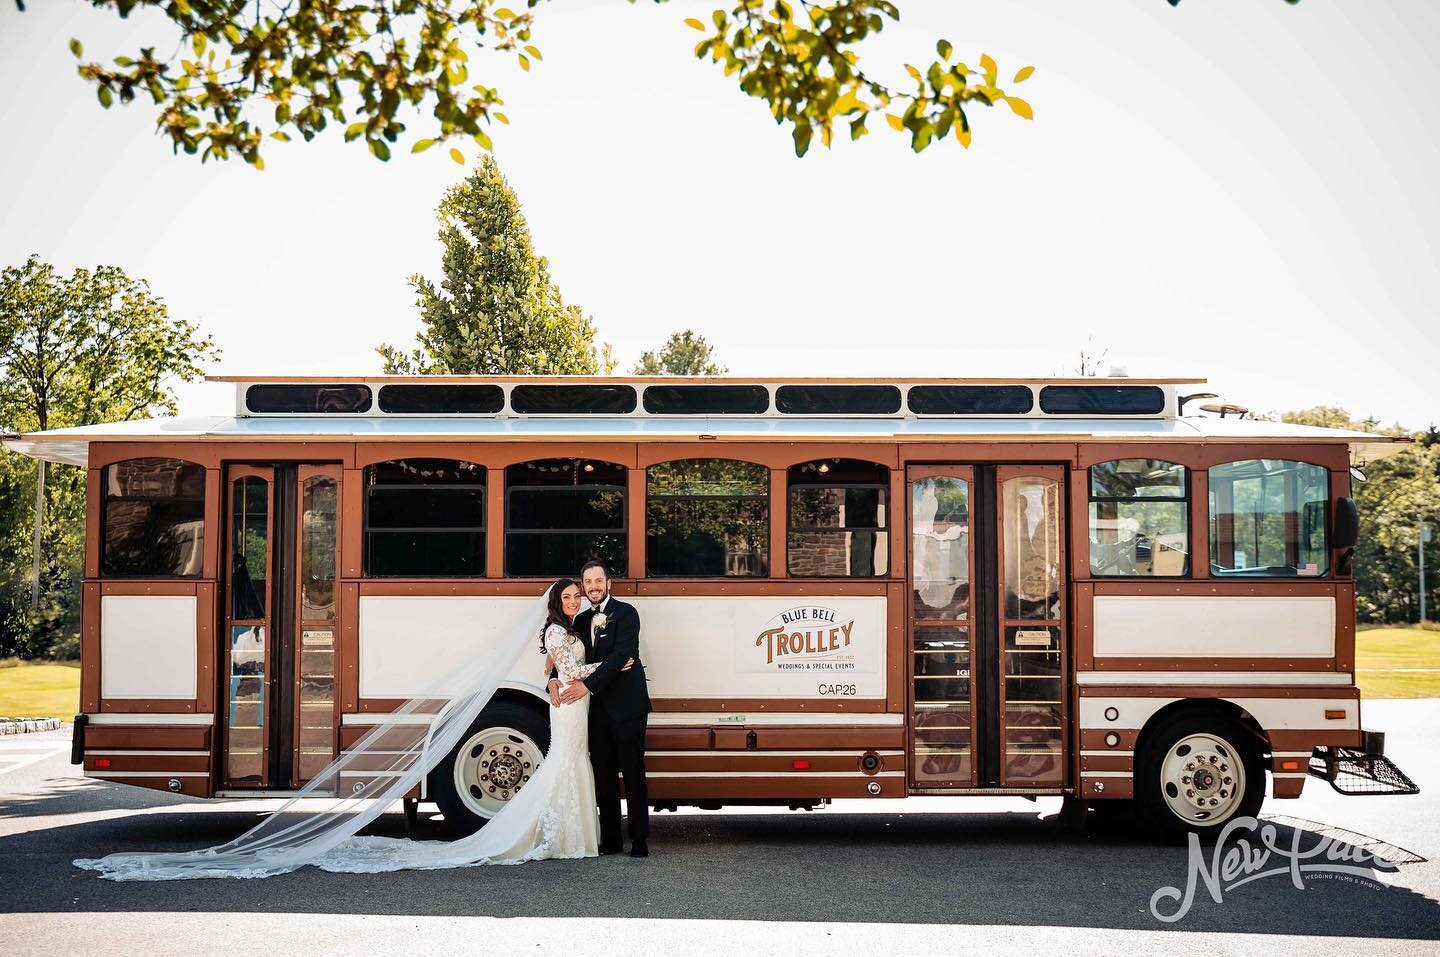 Wedding season has officially begun! Kicked off Memorial Day weekend with fantastic weather and a perfect day for our owners Alex and Alexa 🤍 Click the link in our bio to request a quote today 🚃